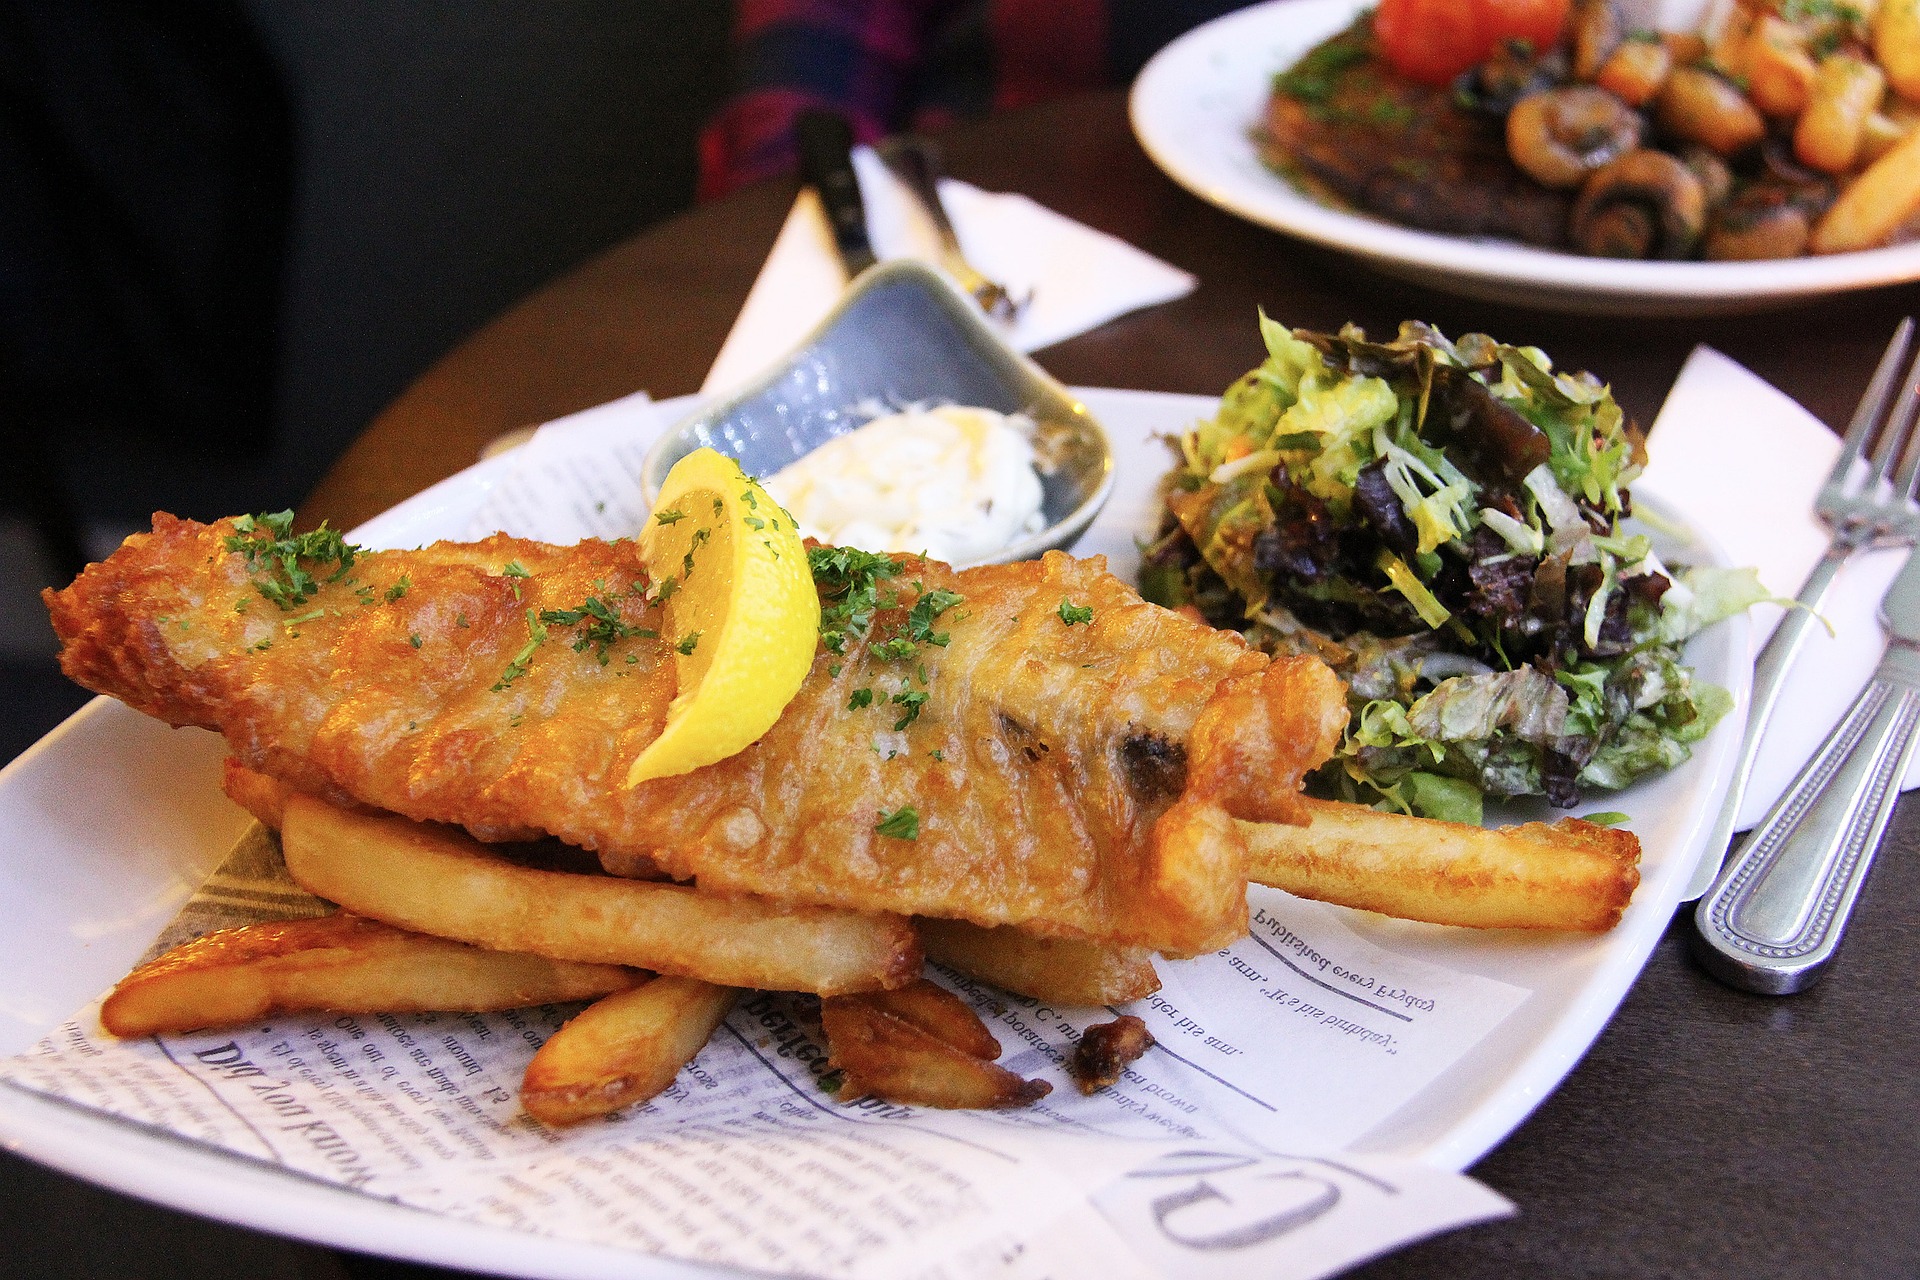 A plate of fish and chips like those you can find at local seafood restaurants on Kauai.